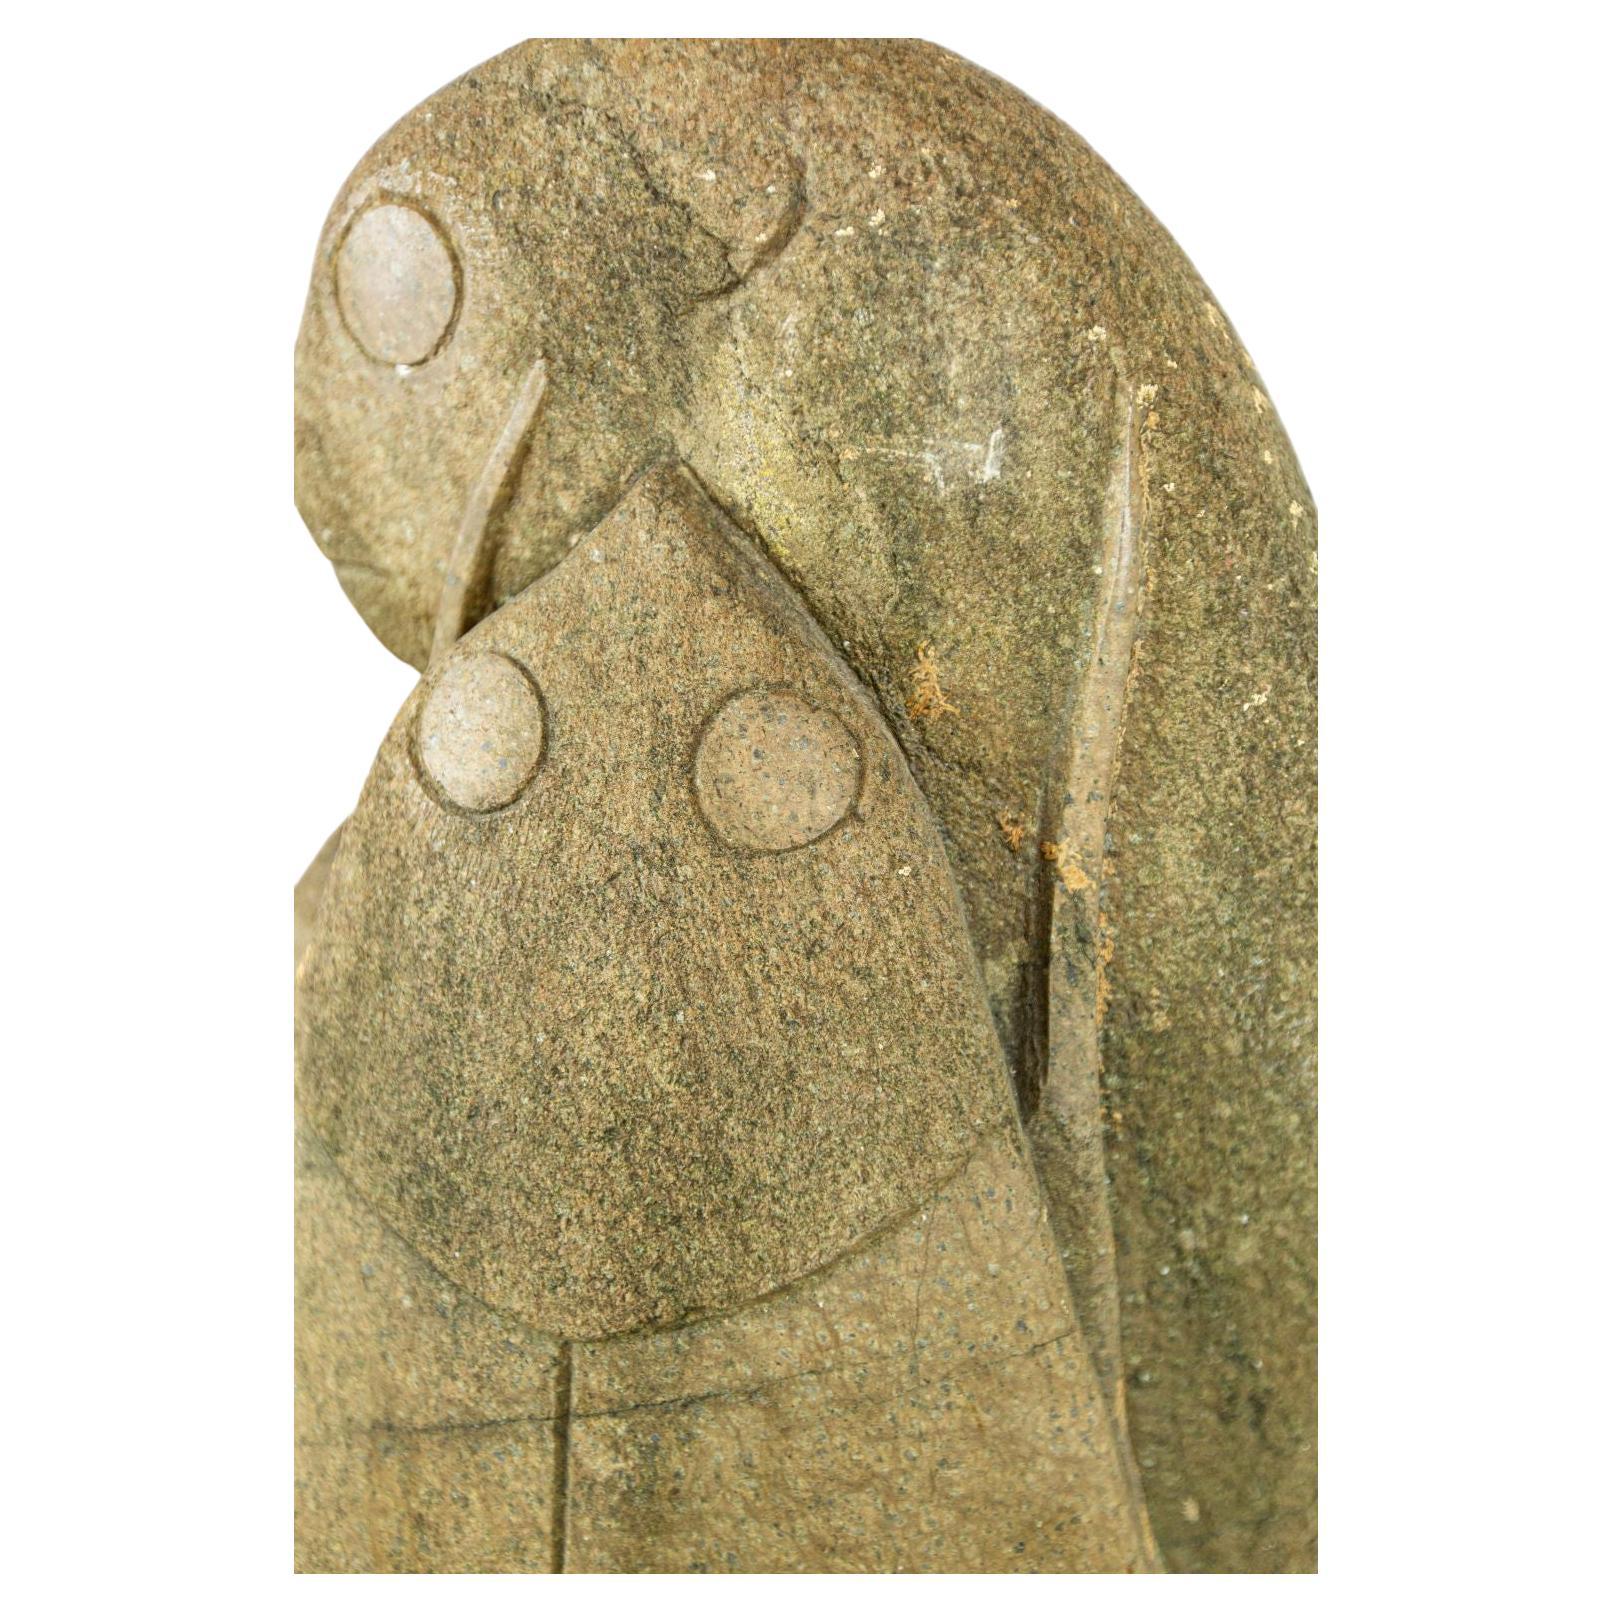 Stone sculpture by George Papashvily in Green Granite 4